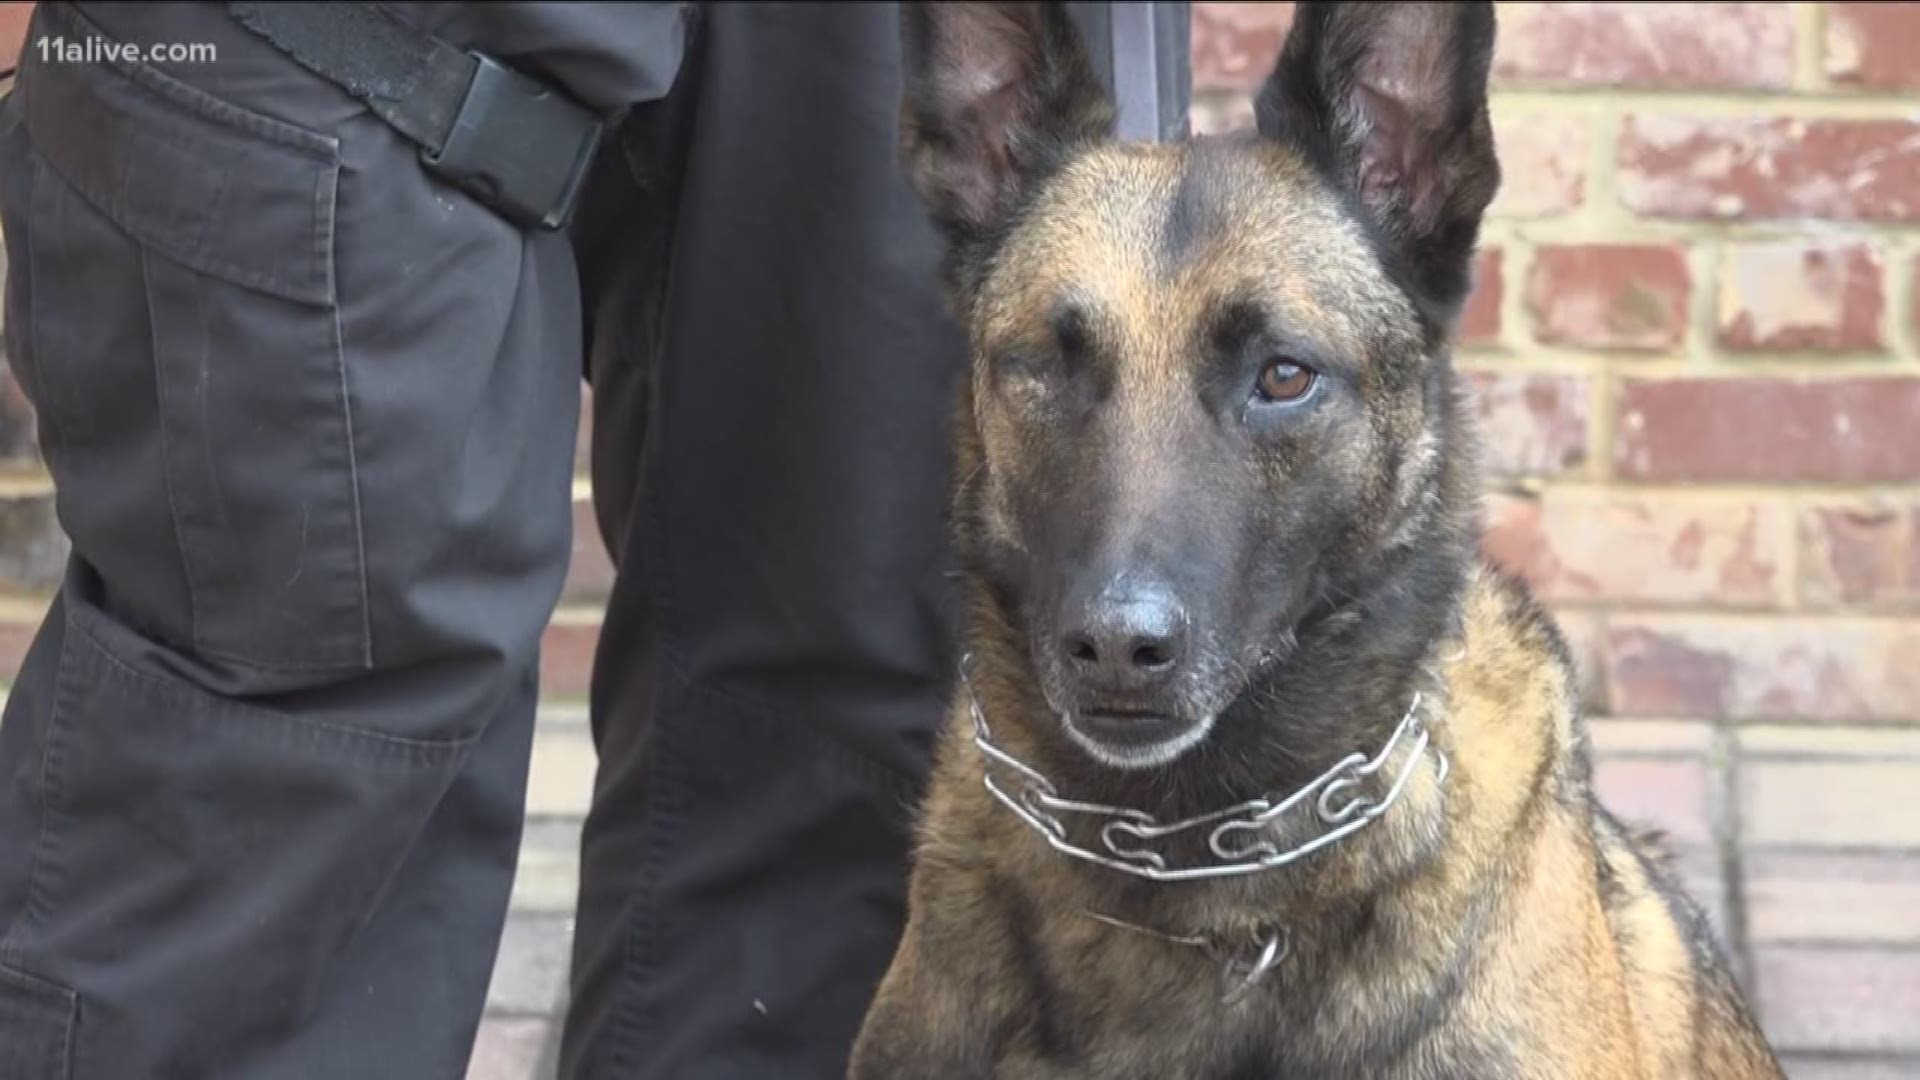 His handler, Officer Norman Larsen, said Indi couldn't wait to get back to work.